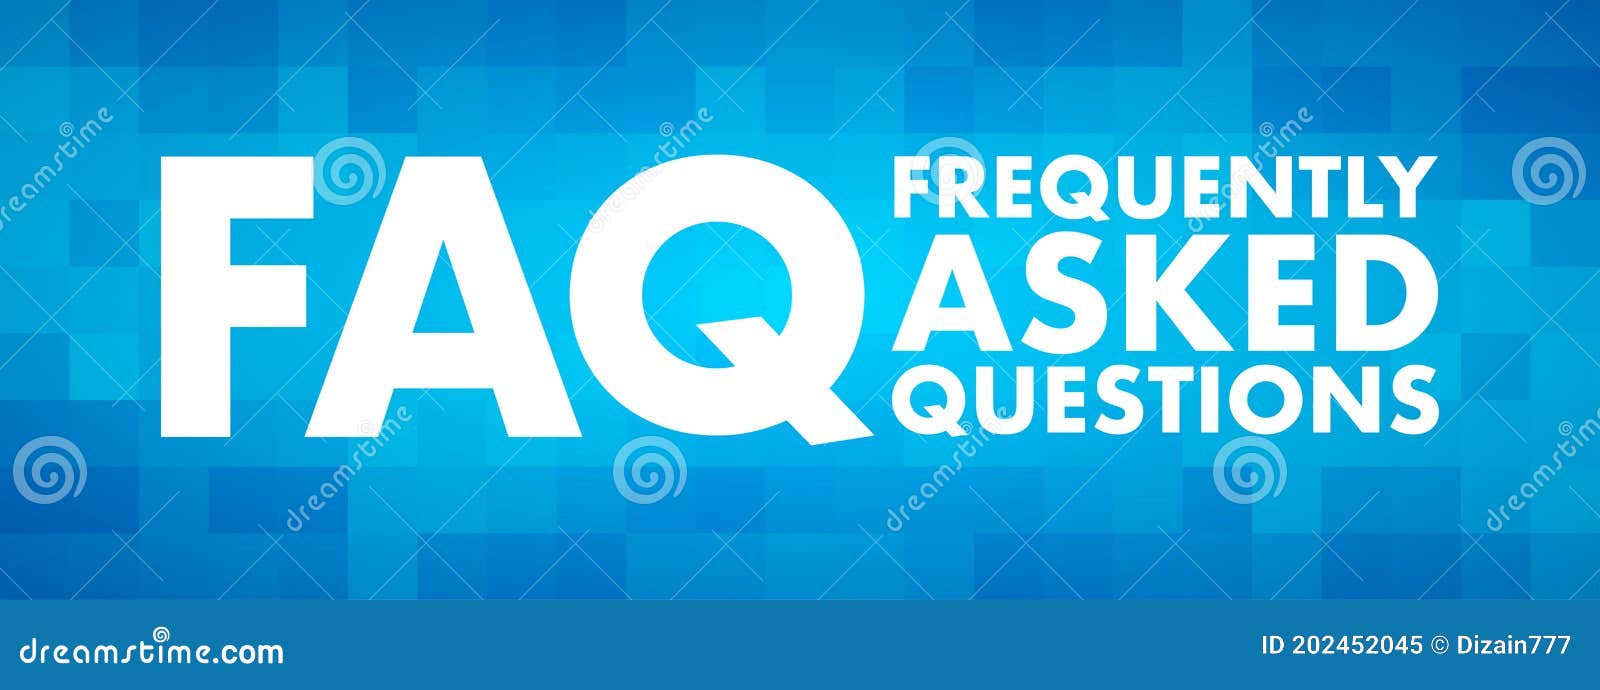 faq - frequently asked questions acronym